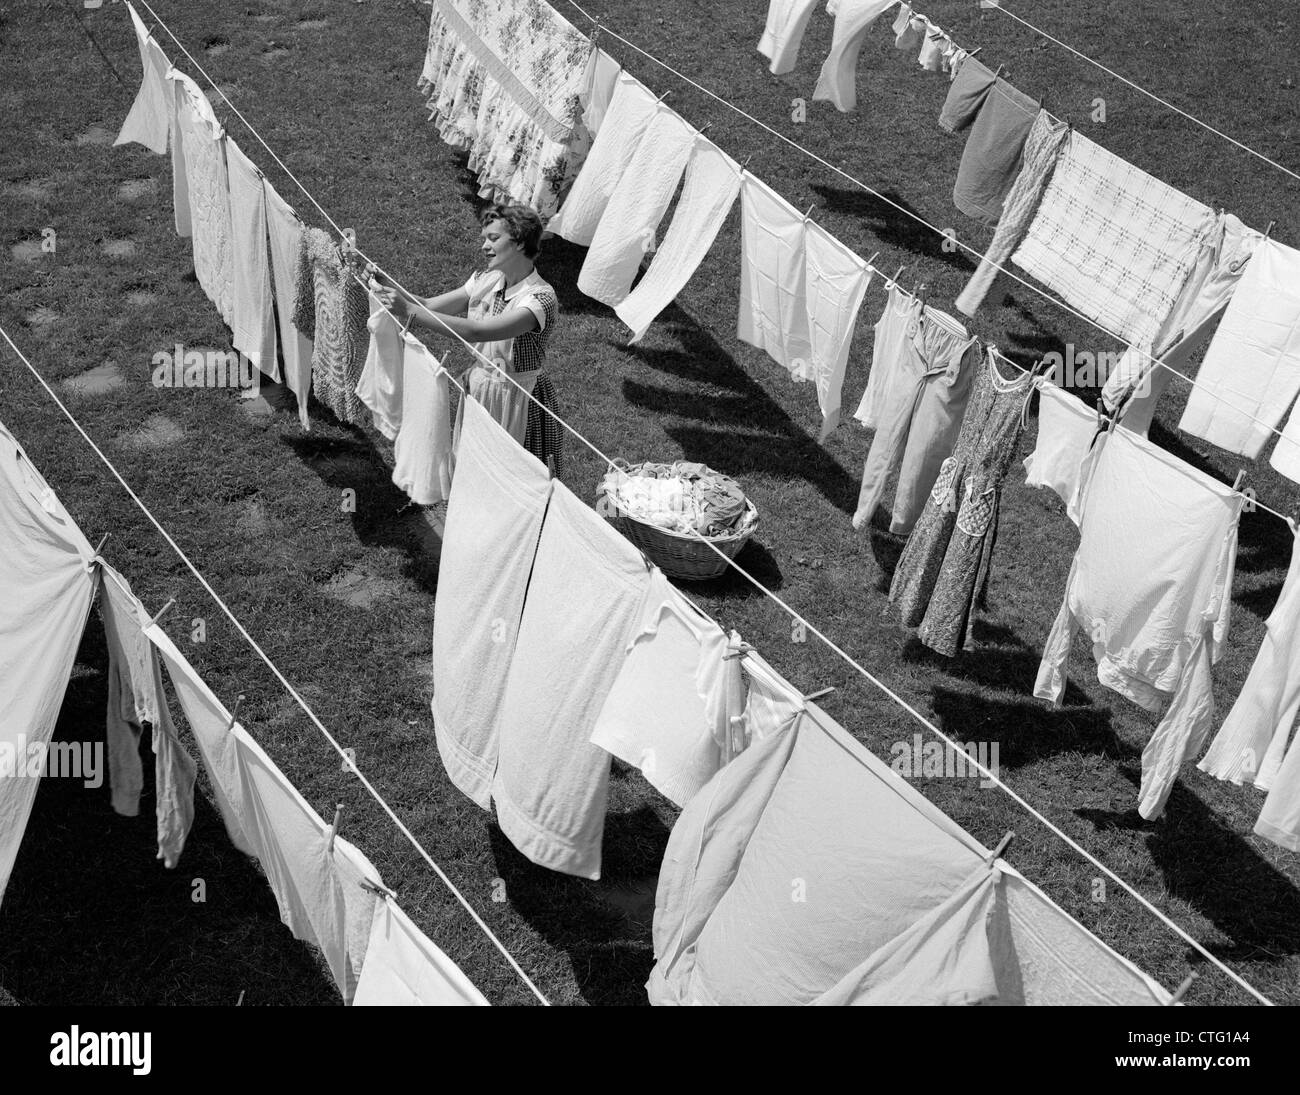 1950s HOUSEWIFE HANGING LAUNDRY IN BACKYARD Stock Photo